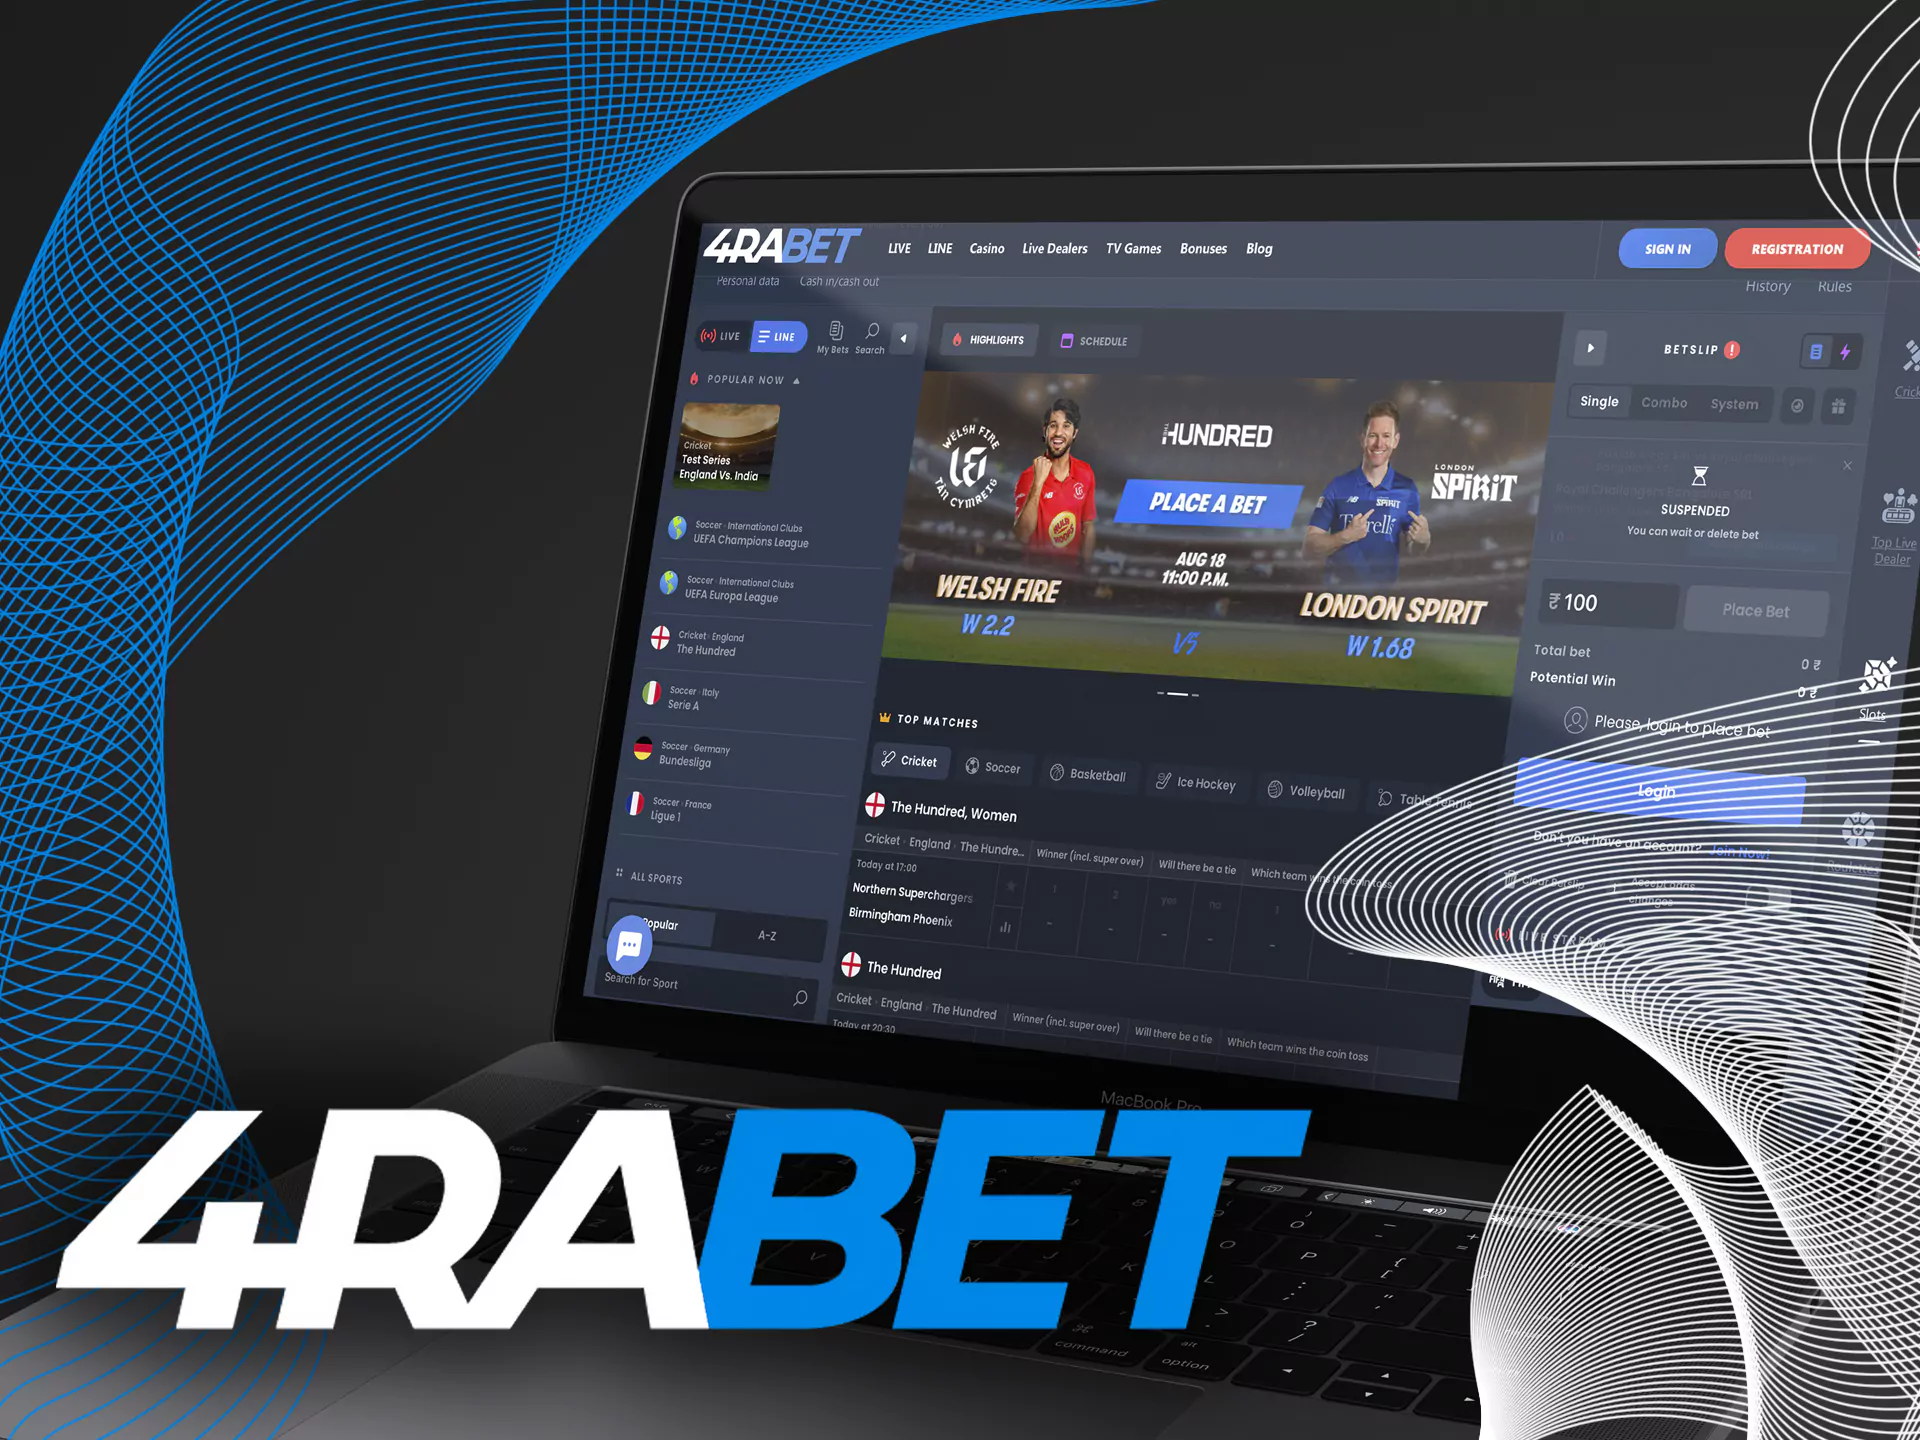 Our betting company 4rabet started in 2018 and we are the official owner in India.